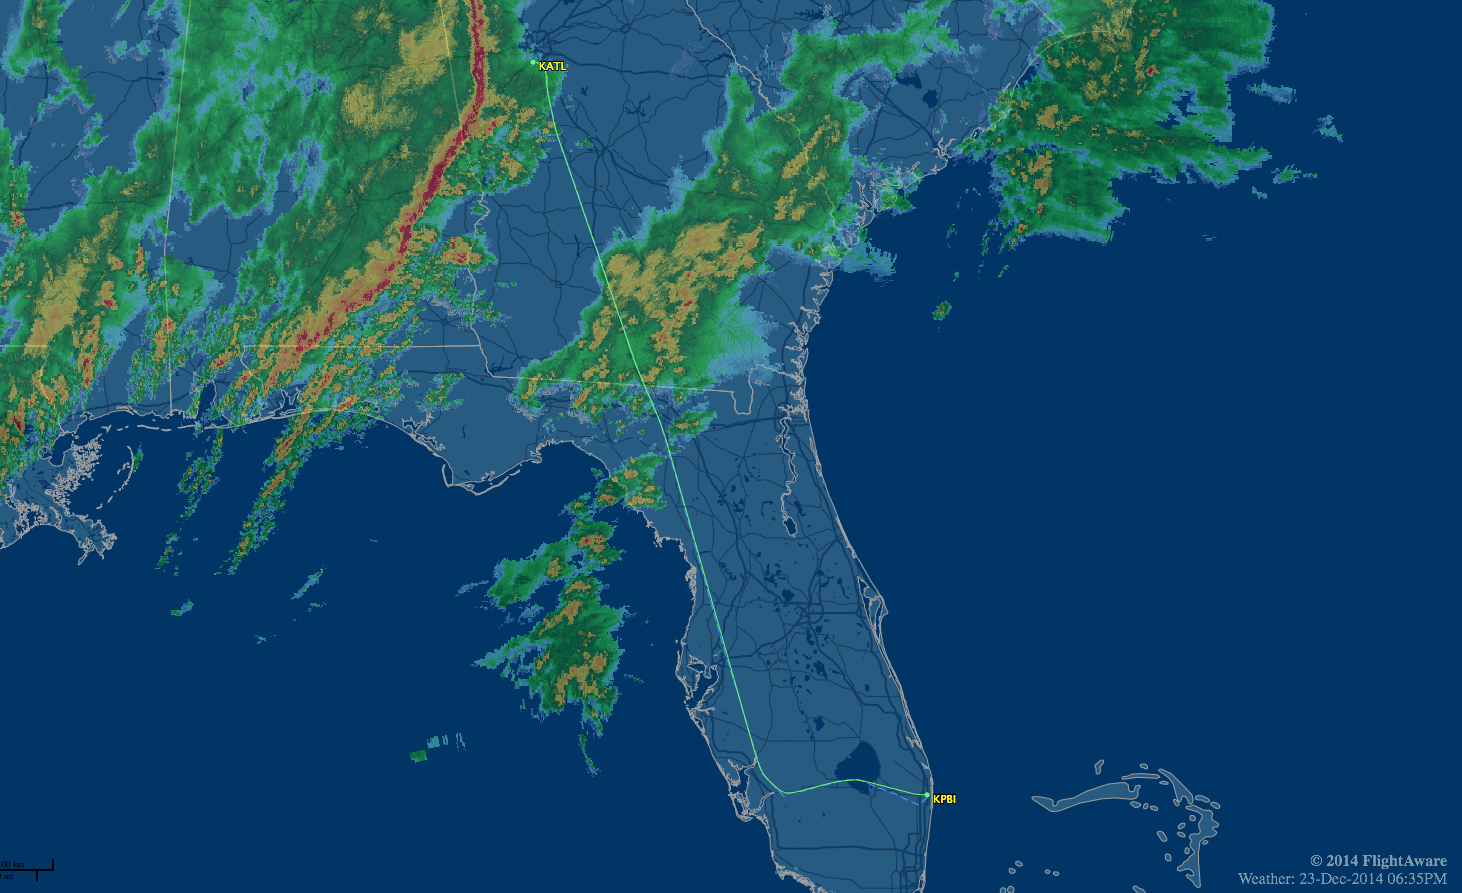 The route for tonight's flight to PBI